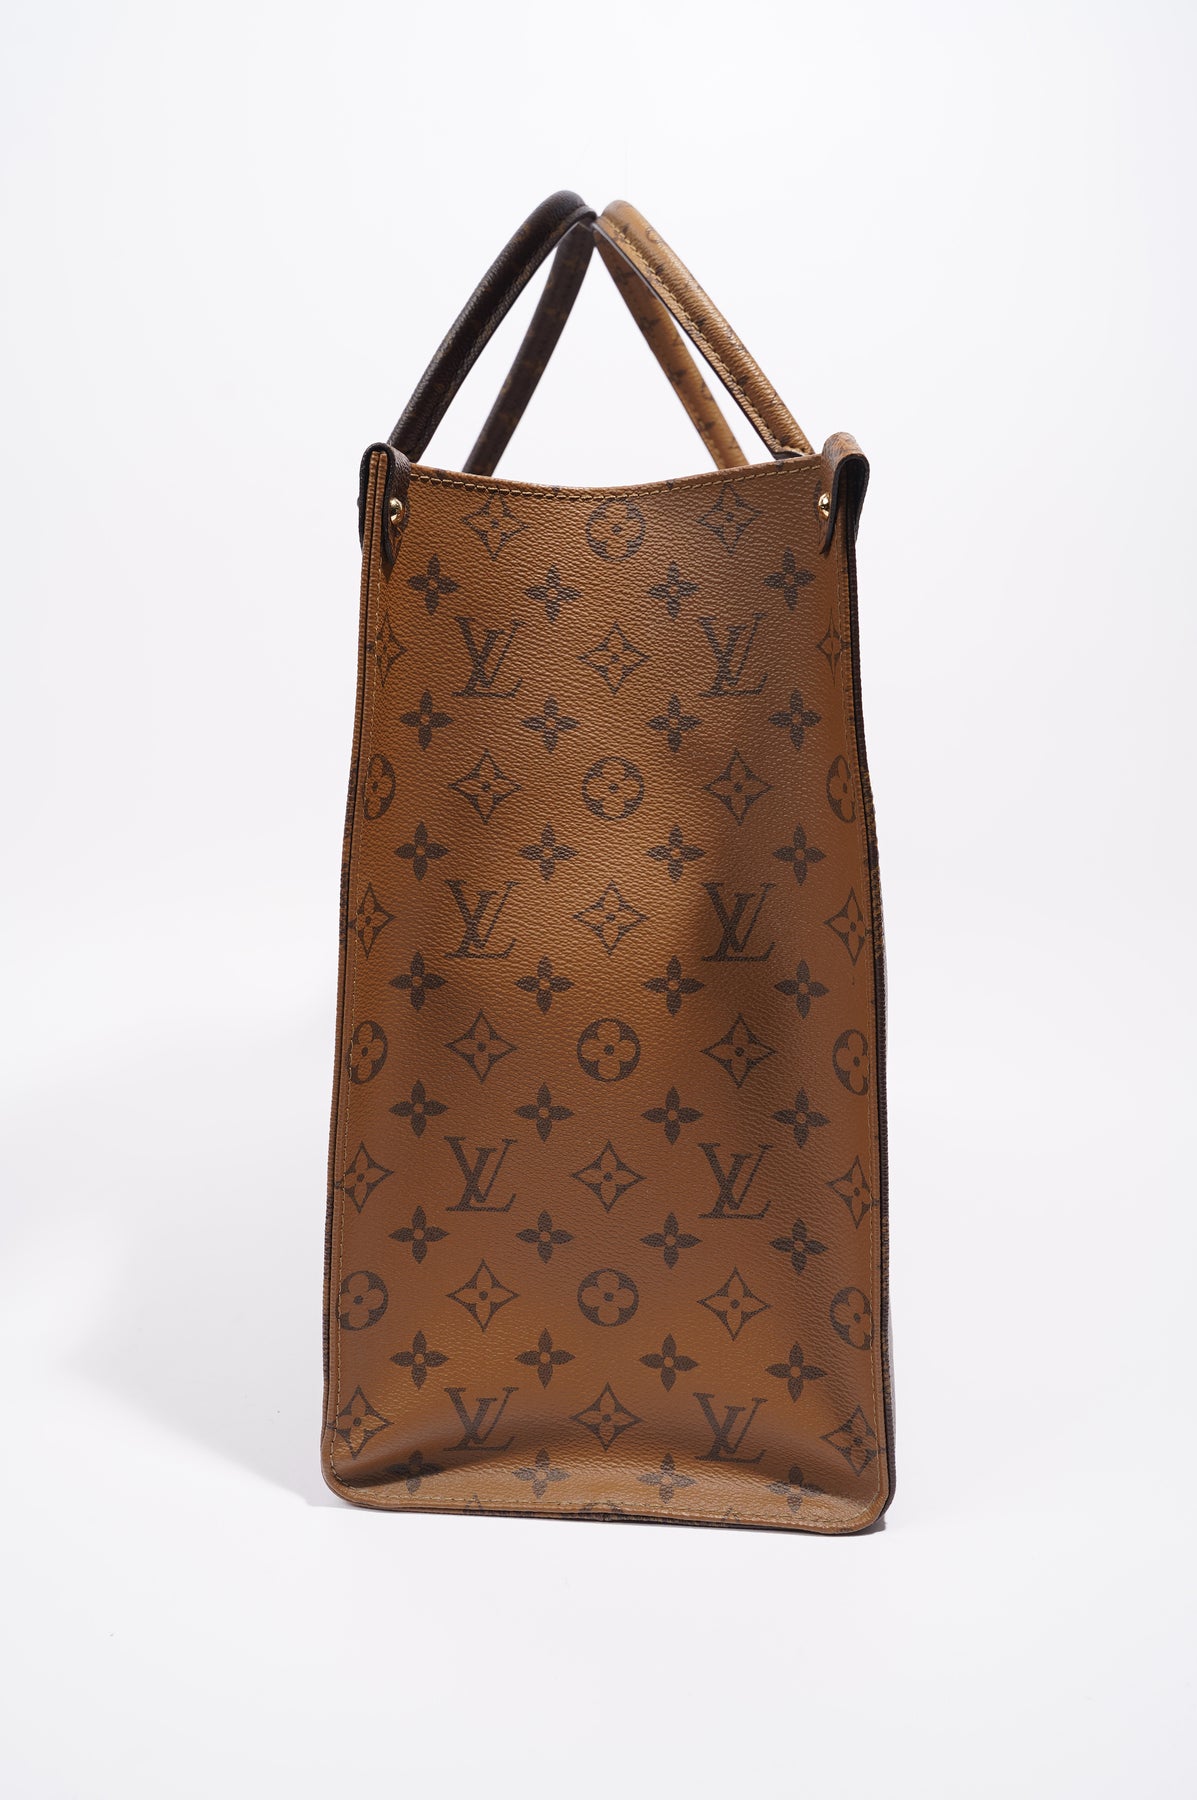 Buy online Lv On The Go Tote Bag In Pakistan, Rs 11000